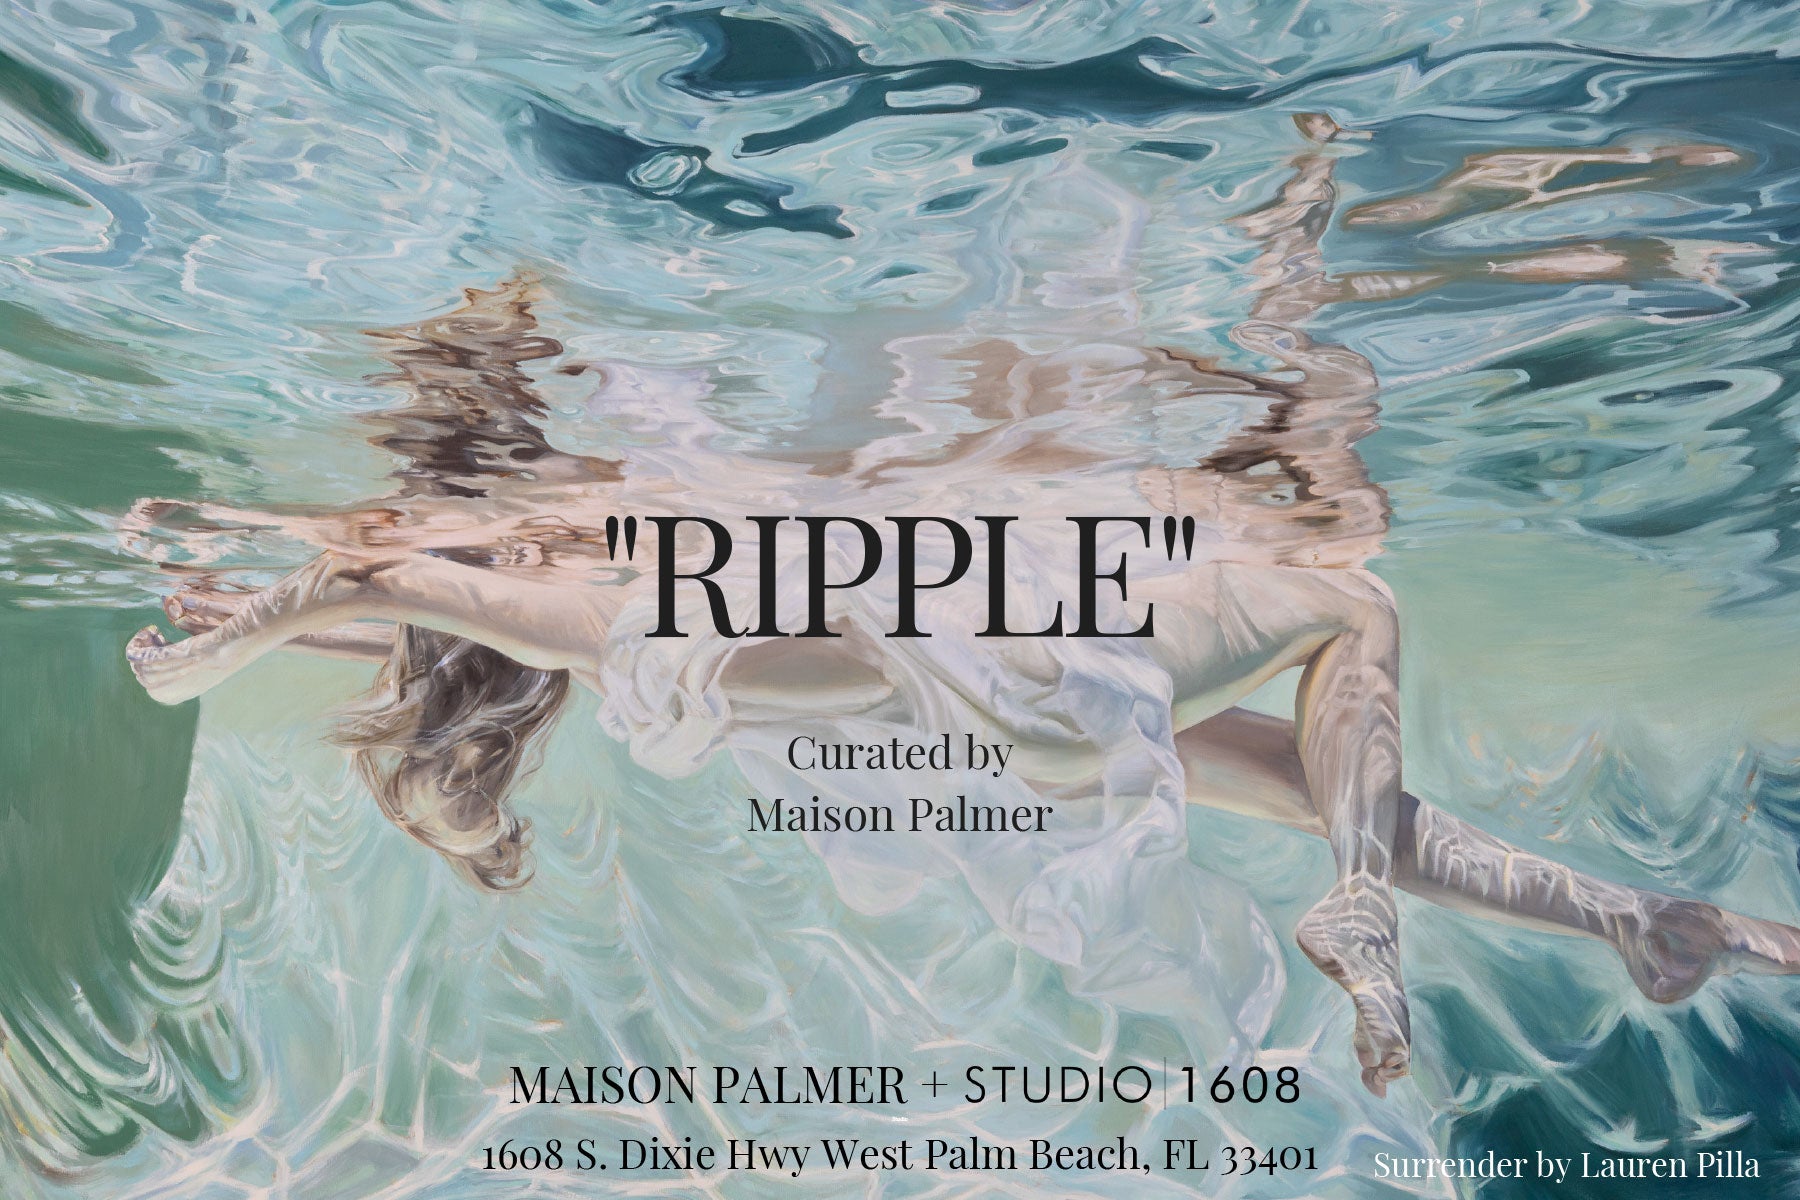 "Ripple" Group Show Opening January 13